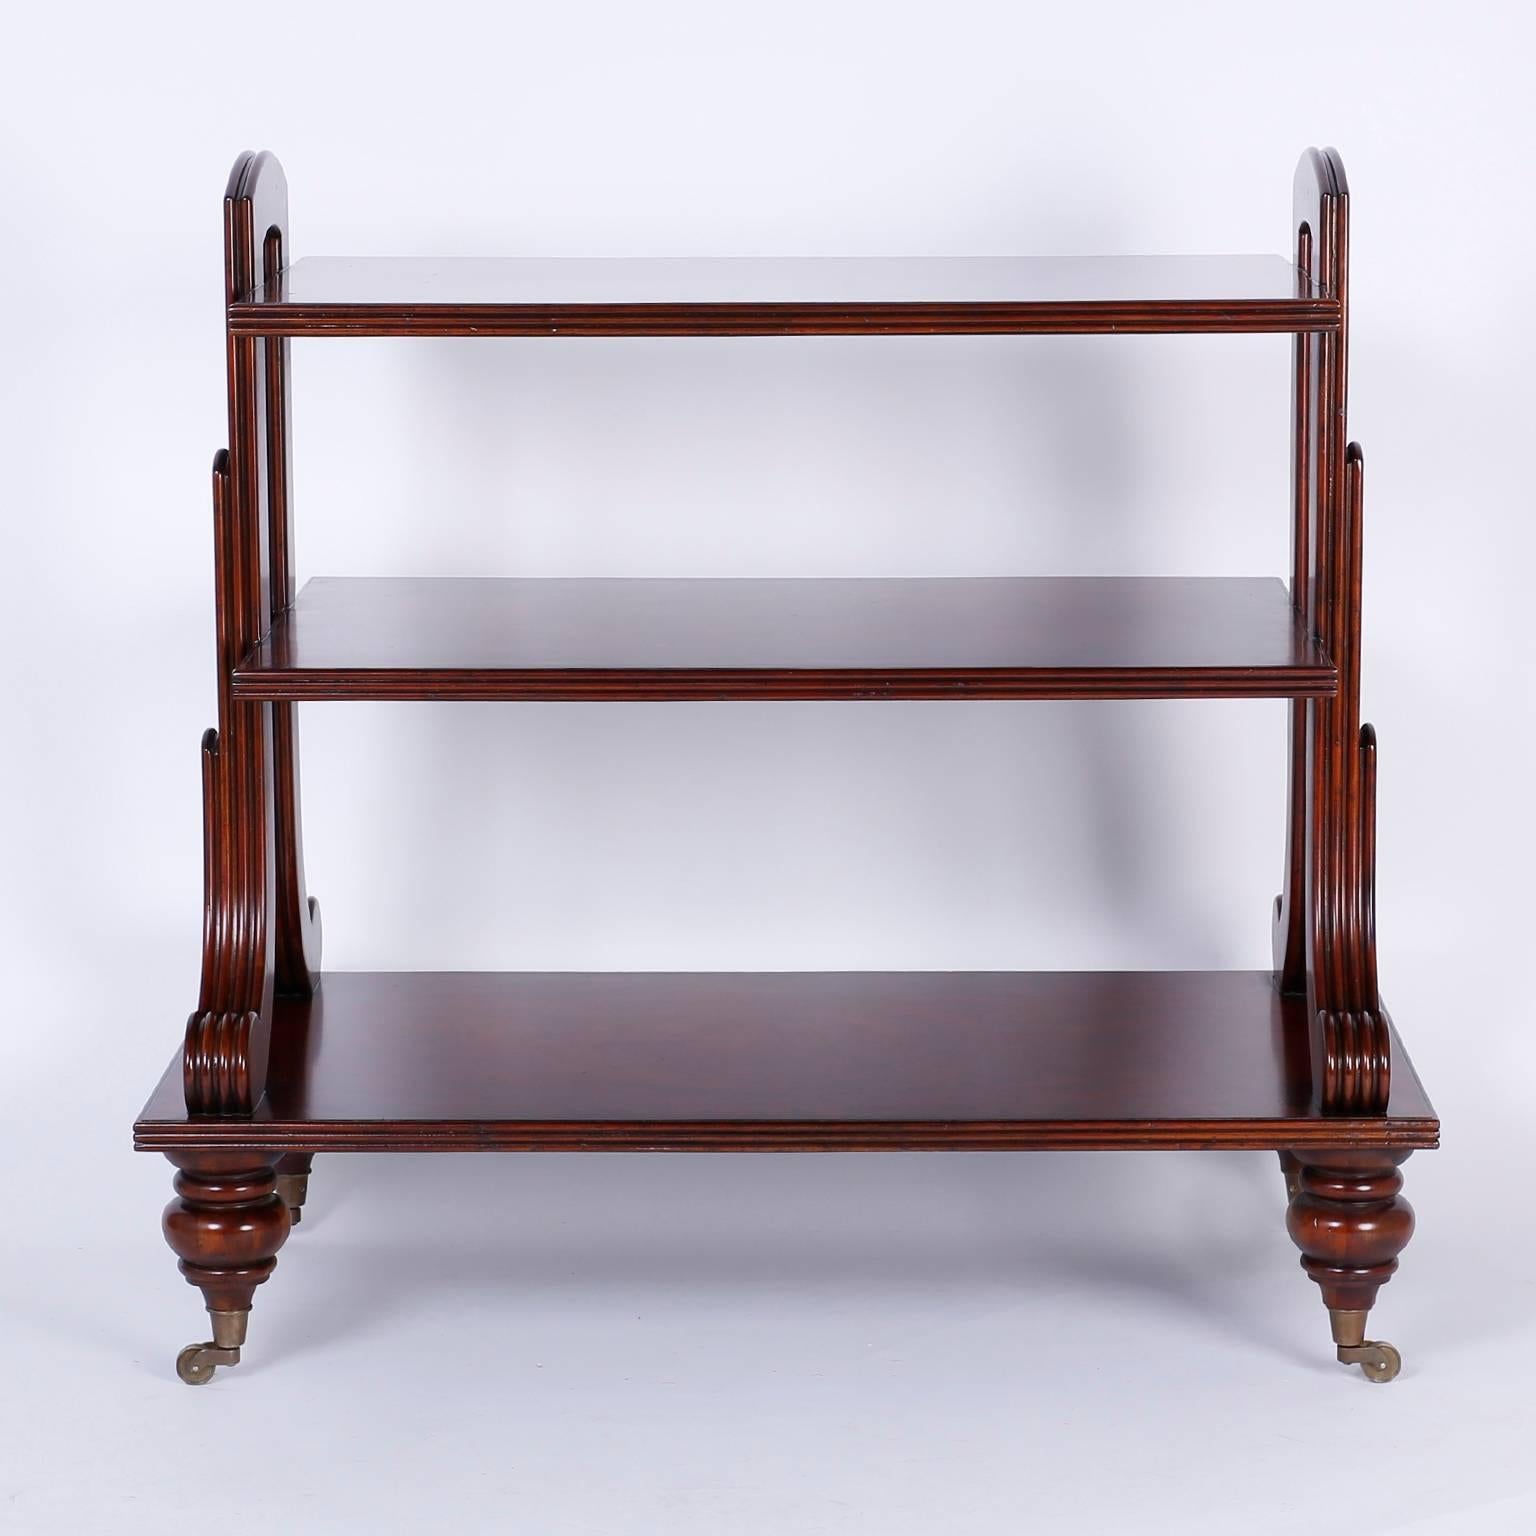 Refined British Colonial style bar with three serving tiers each with dramatic grained mahogany crossbanding and beaded edges. The unusual side supports have paw feet and handles at the top. All this on turned legs with brass casters.